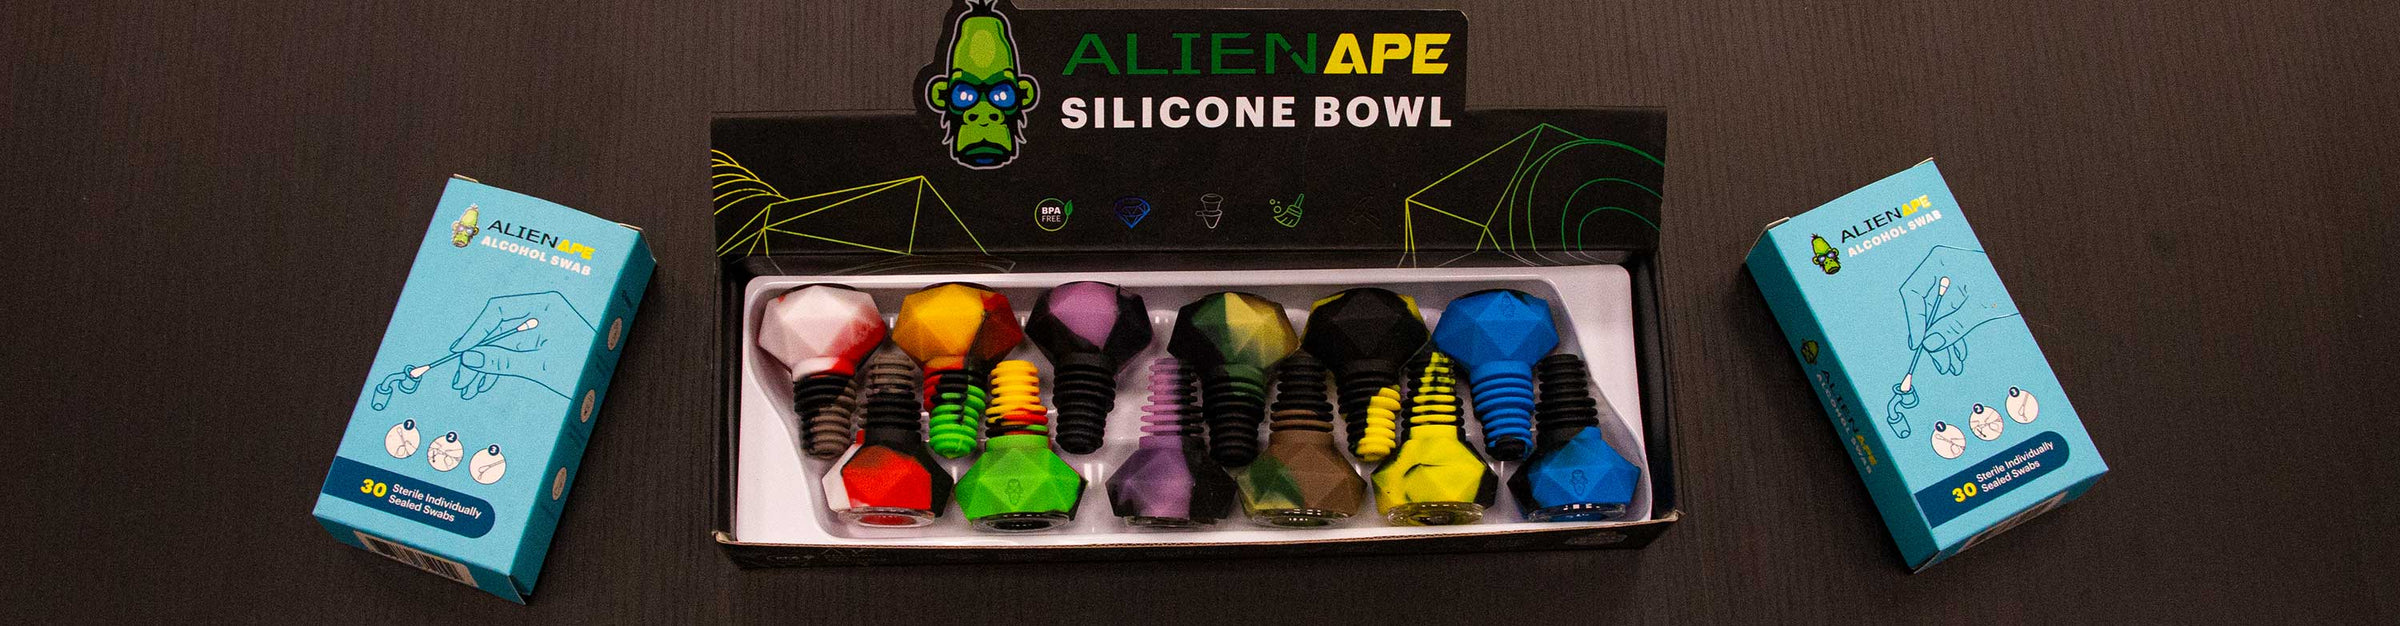 Alien Ape products display laying down on black wooden table.